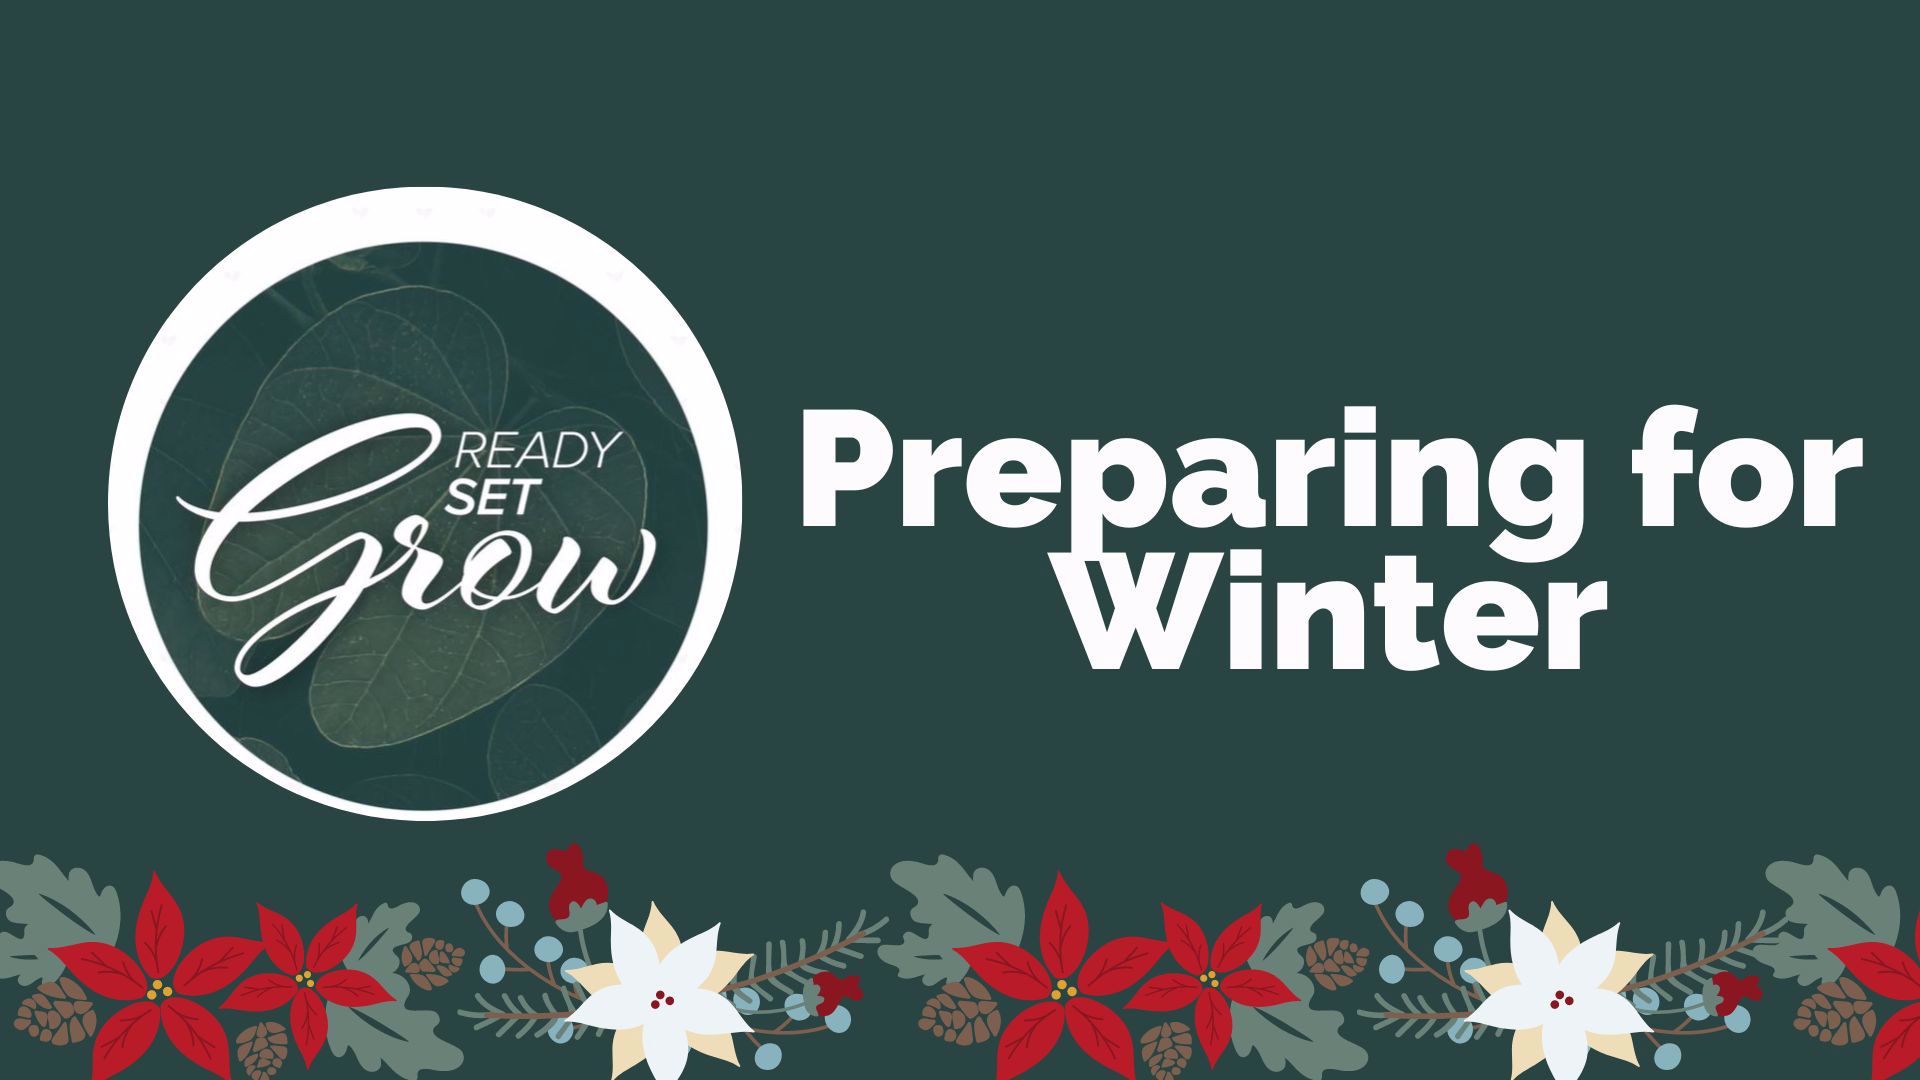 Tips to get your yards, gardens and homes ready for the winter months ahead. How to protect your shrubs, plus keep the heat inside your house.